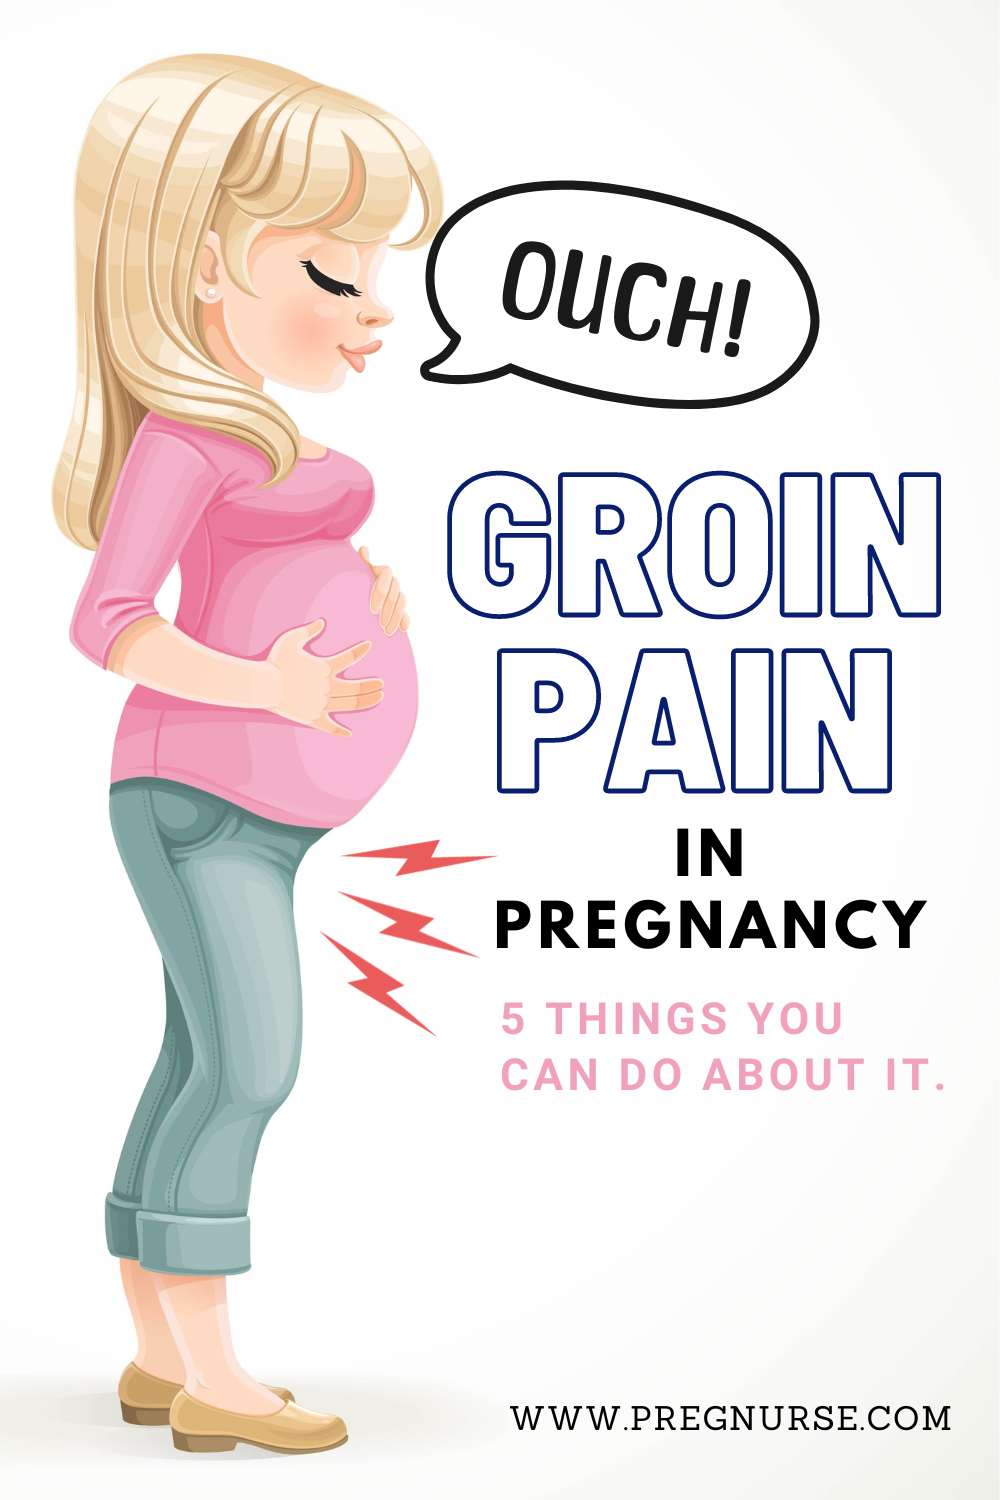 Are you experiencing groin, inner thigh, or pelvic pain during pregnancy? You're not alone. Discover what's considered normal and when to seek medical attention. Don't just accept this as part of pregnancy, there ARE things you can do.